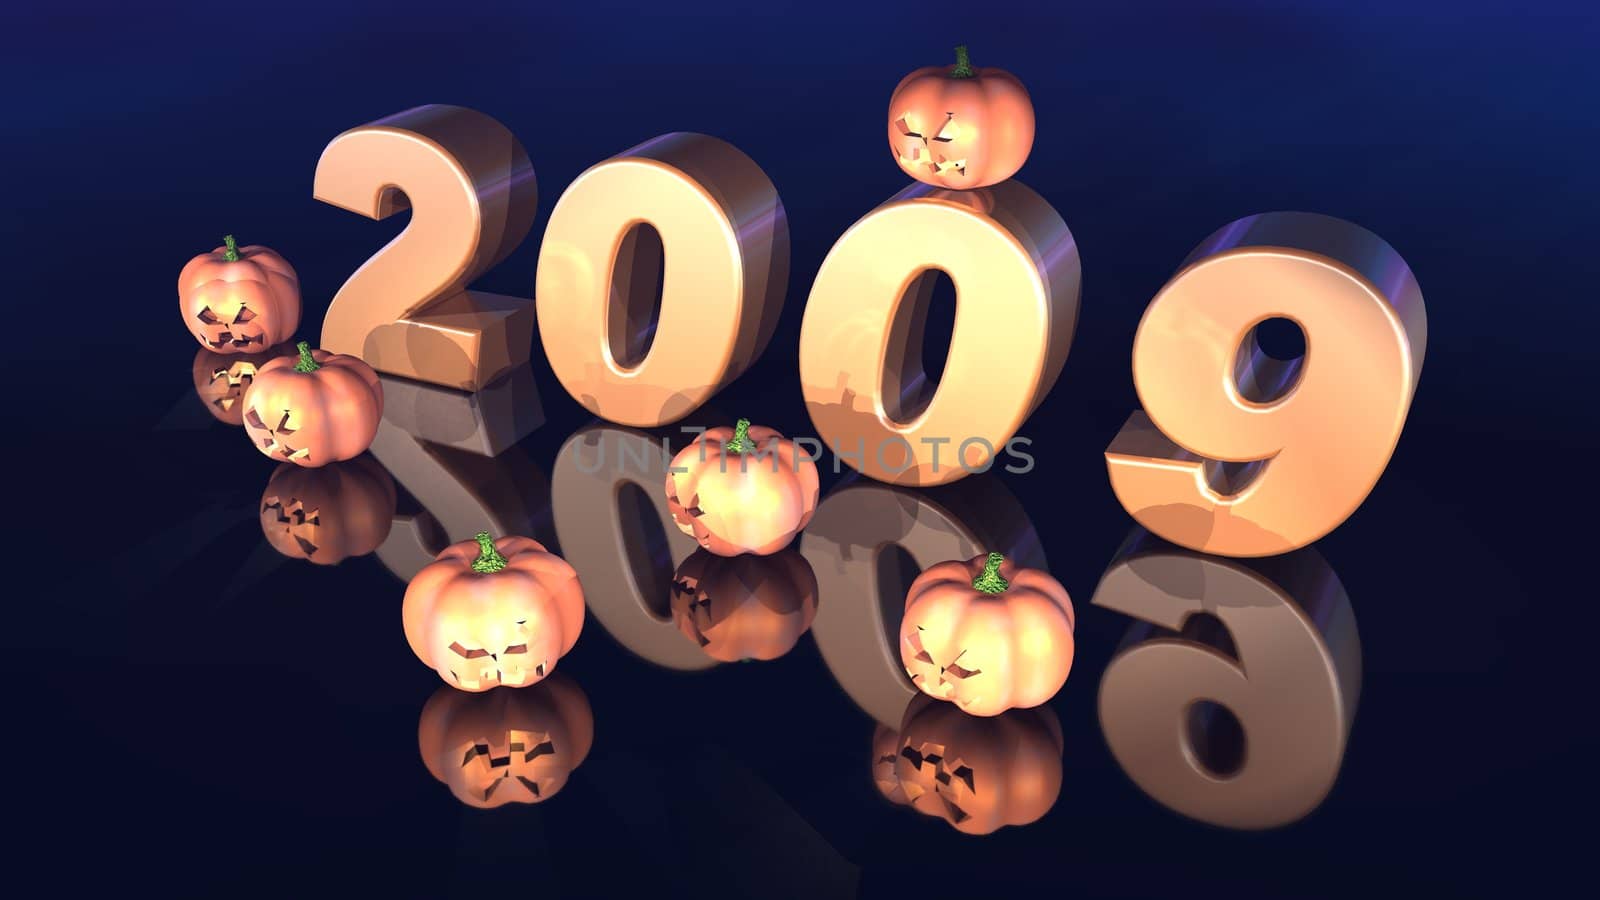 Illustration for the New Year 2009 with an Halloween design